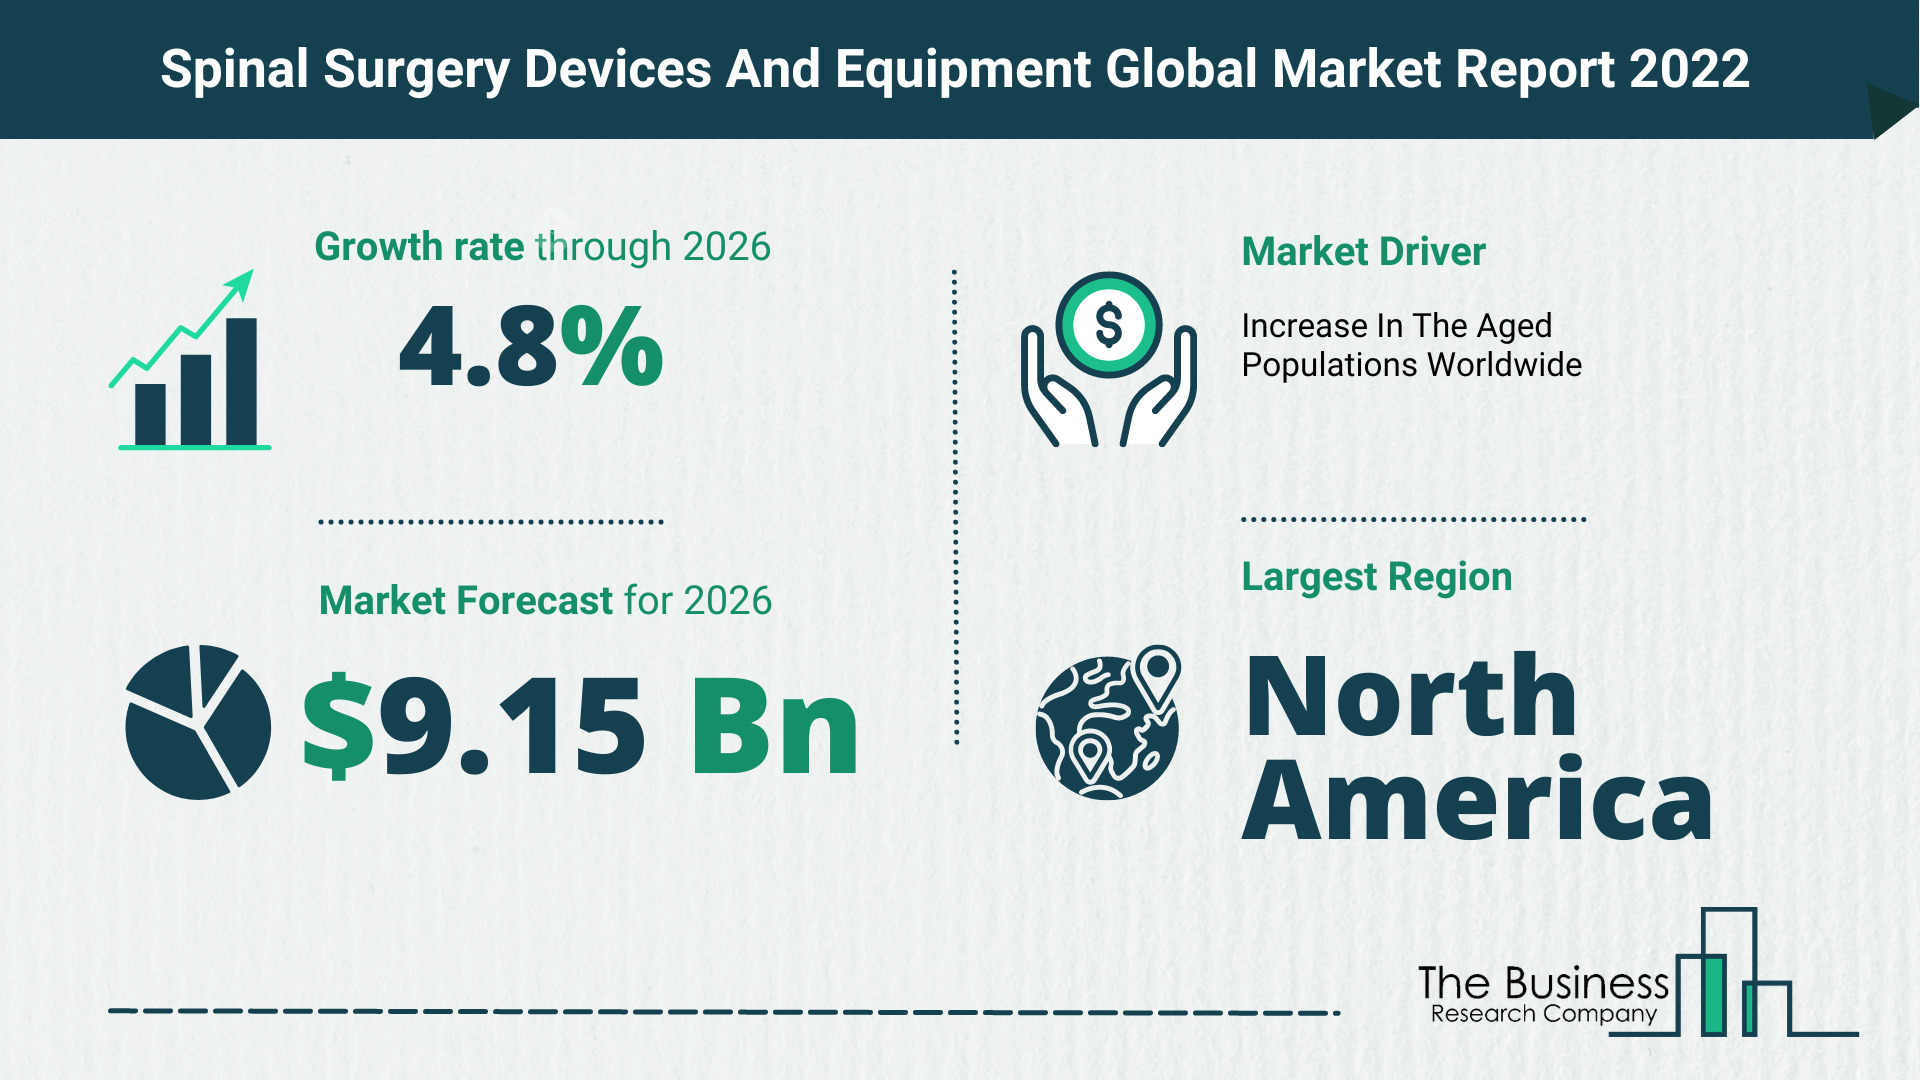 Global Spinal Surgery Devices And Equipment Market 2022 – Market Opportunities And Strategies